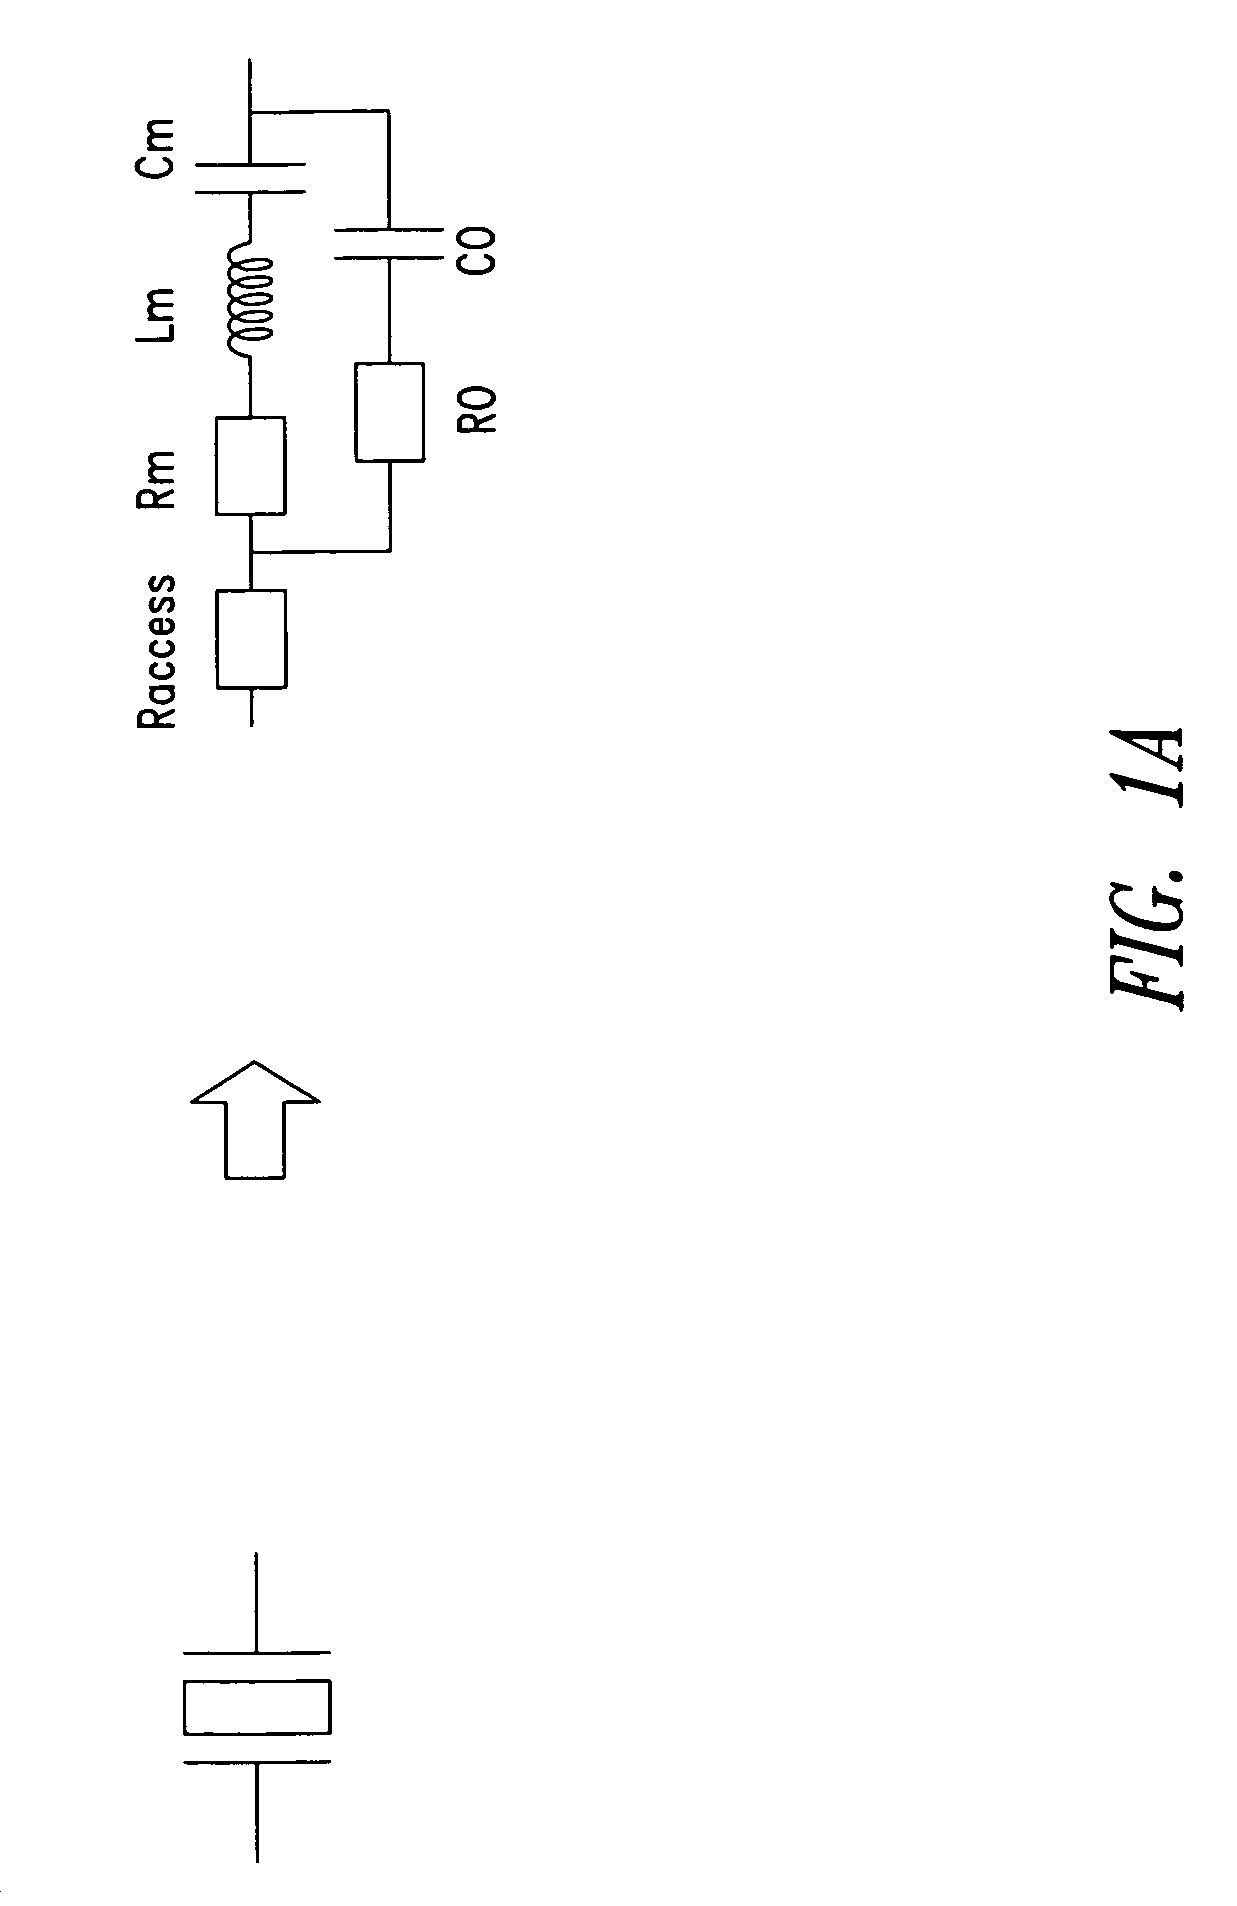 Integrated electronic circuitry comprising tunable resonator